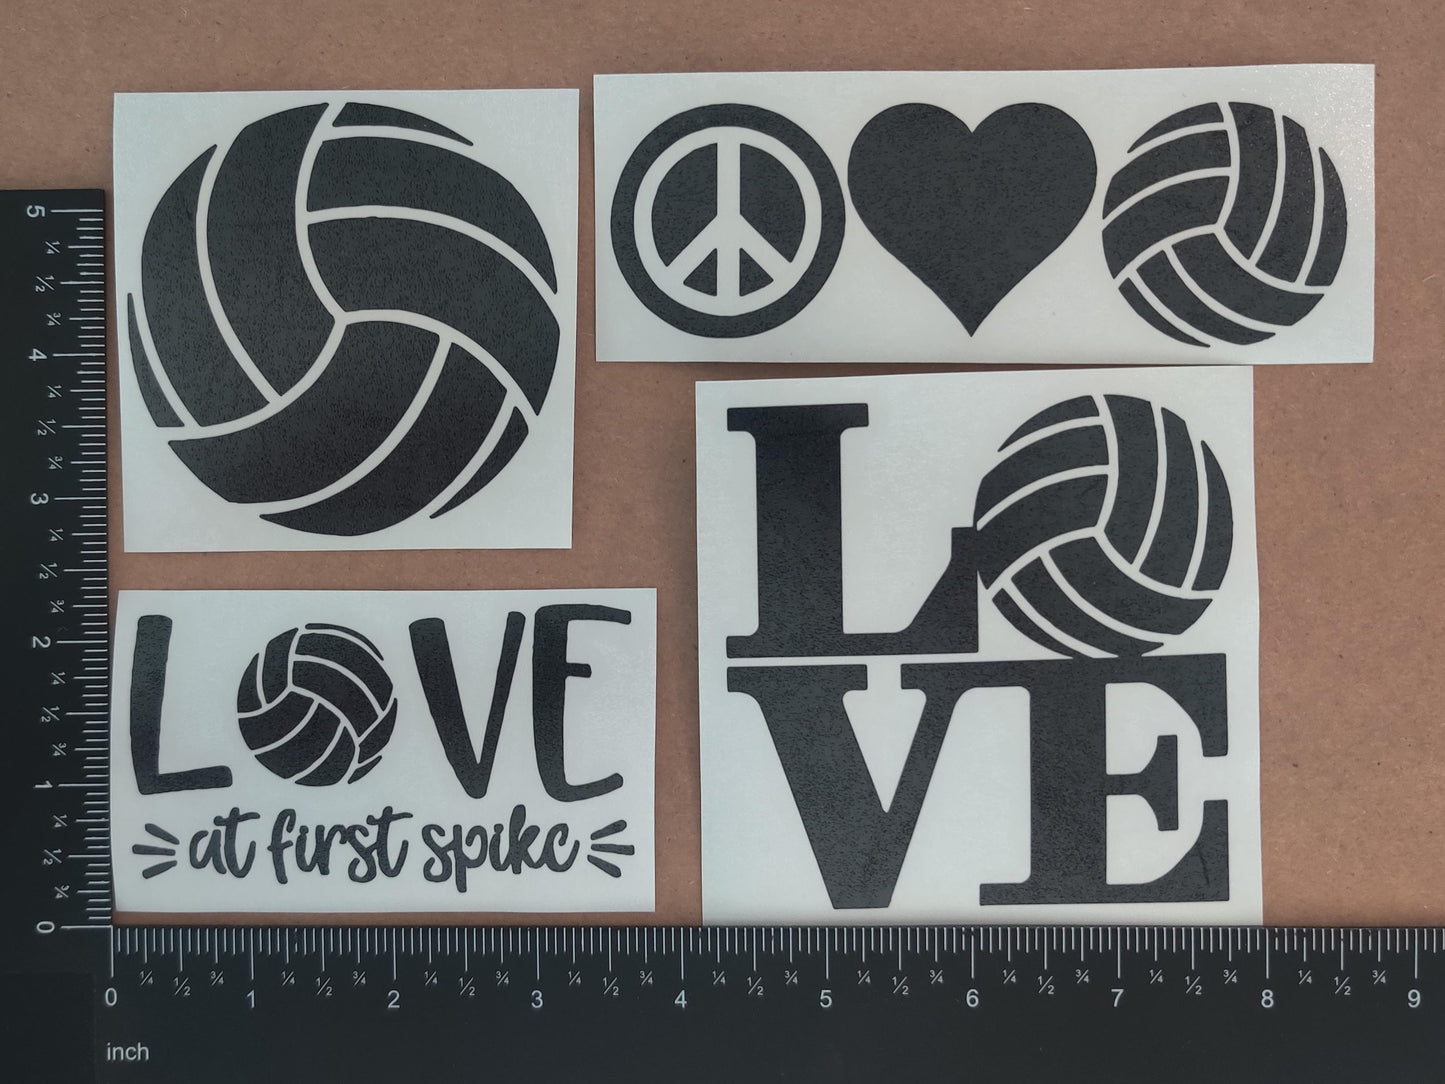 Volleyball Decals 4 pack